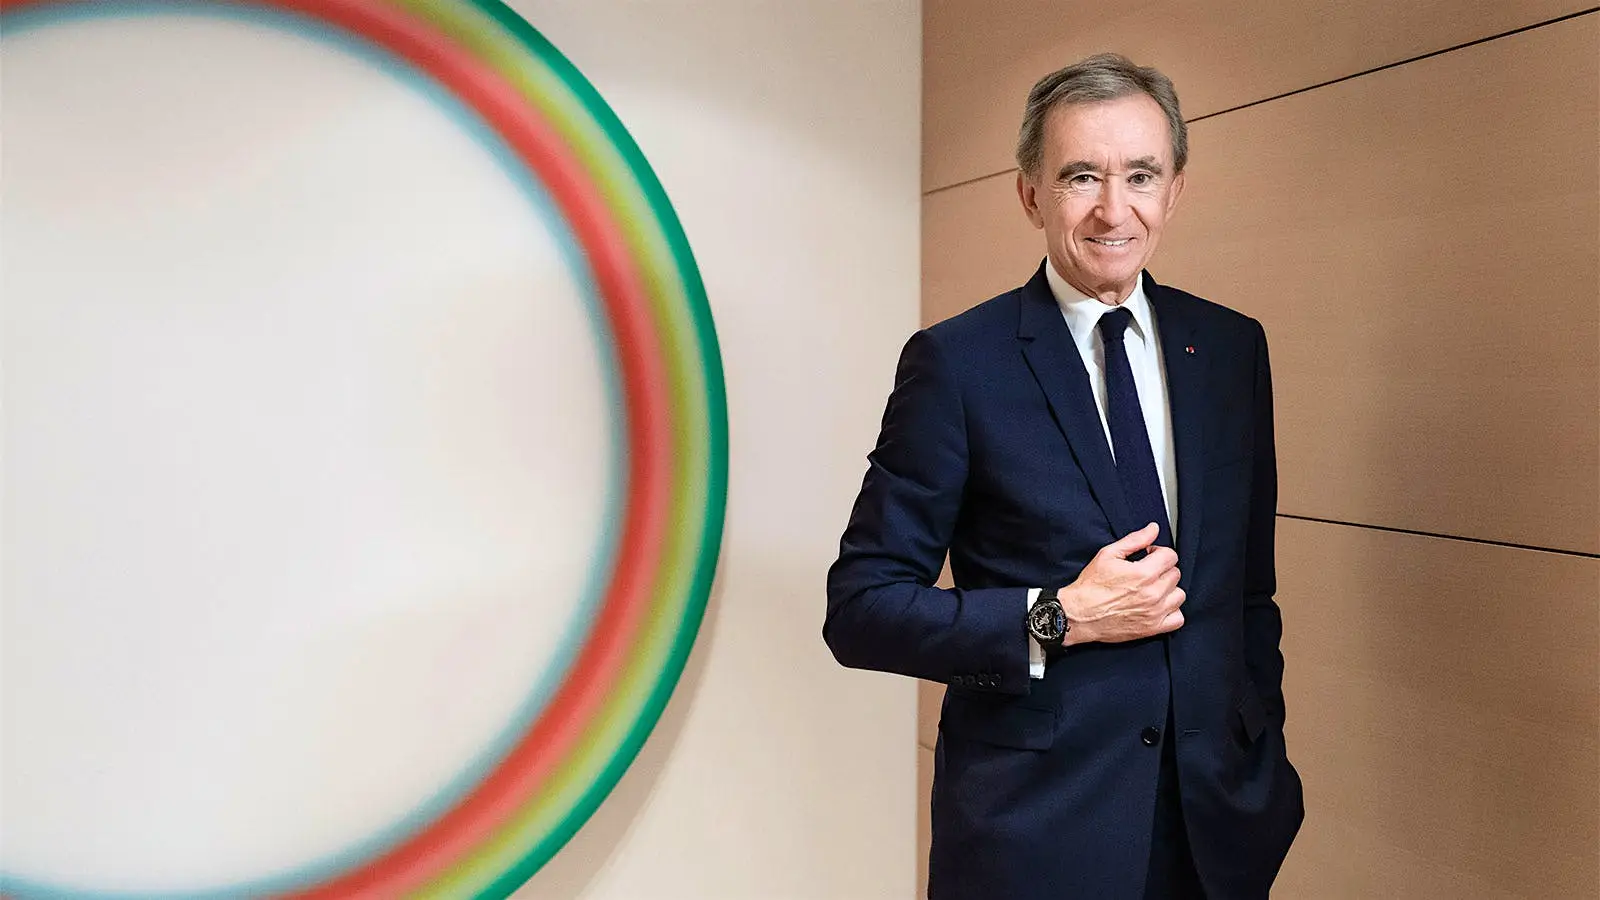 What Bernard Arnault thinks about joint ventures